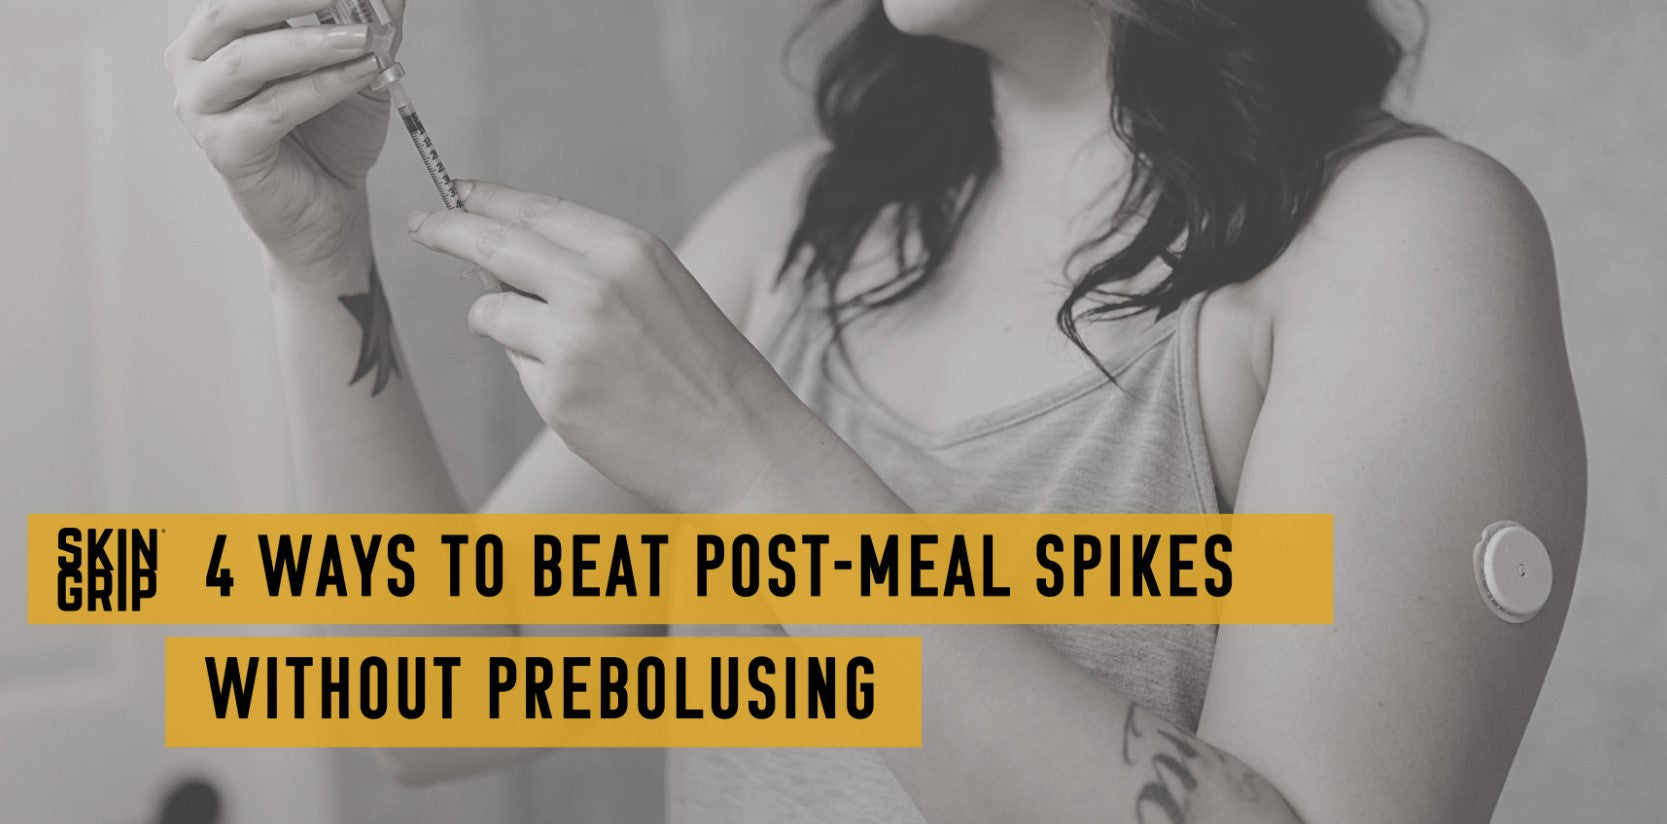 4 Ways to Beat Post-Meal Spikes without Prebolusing 